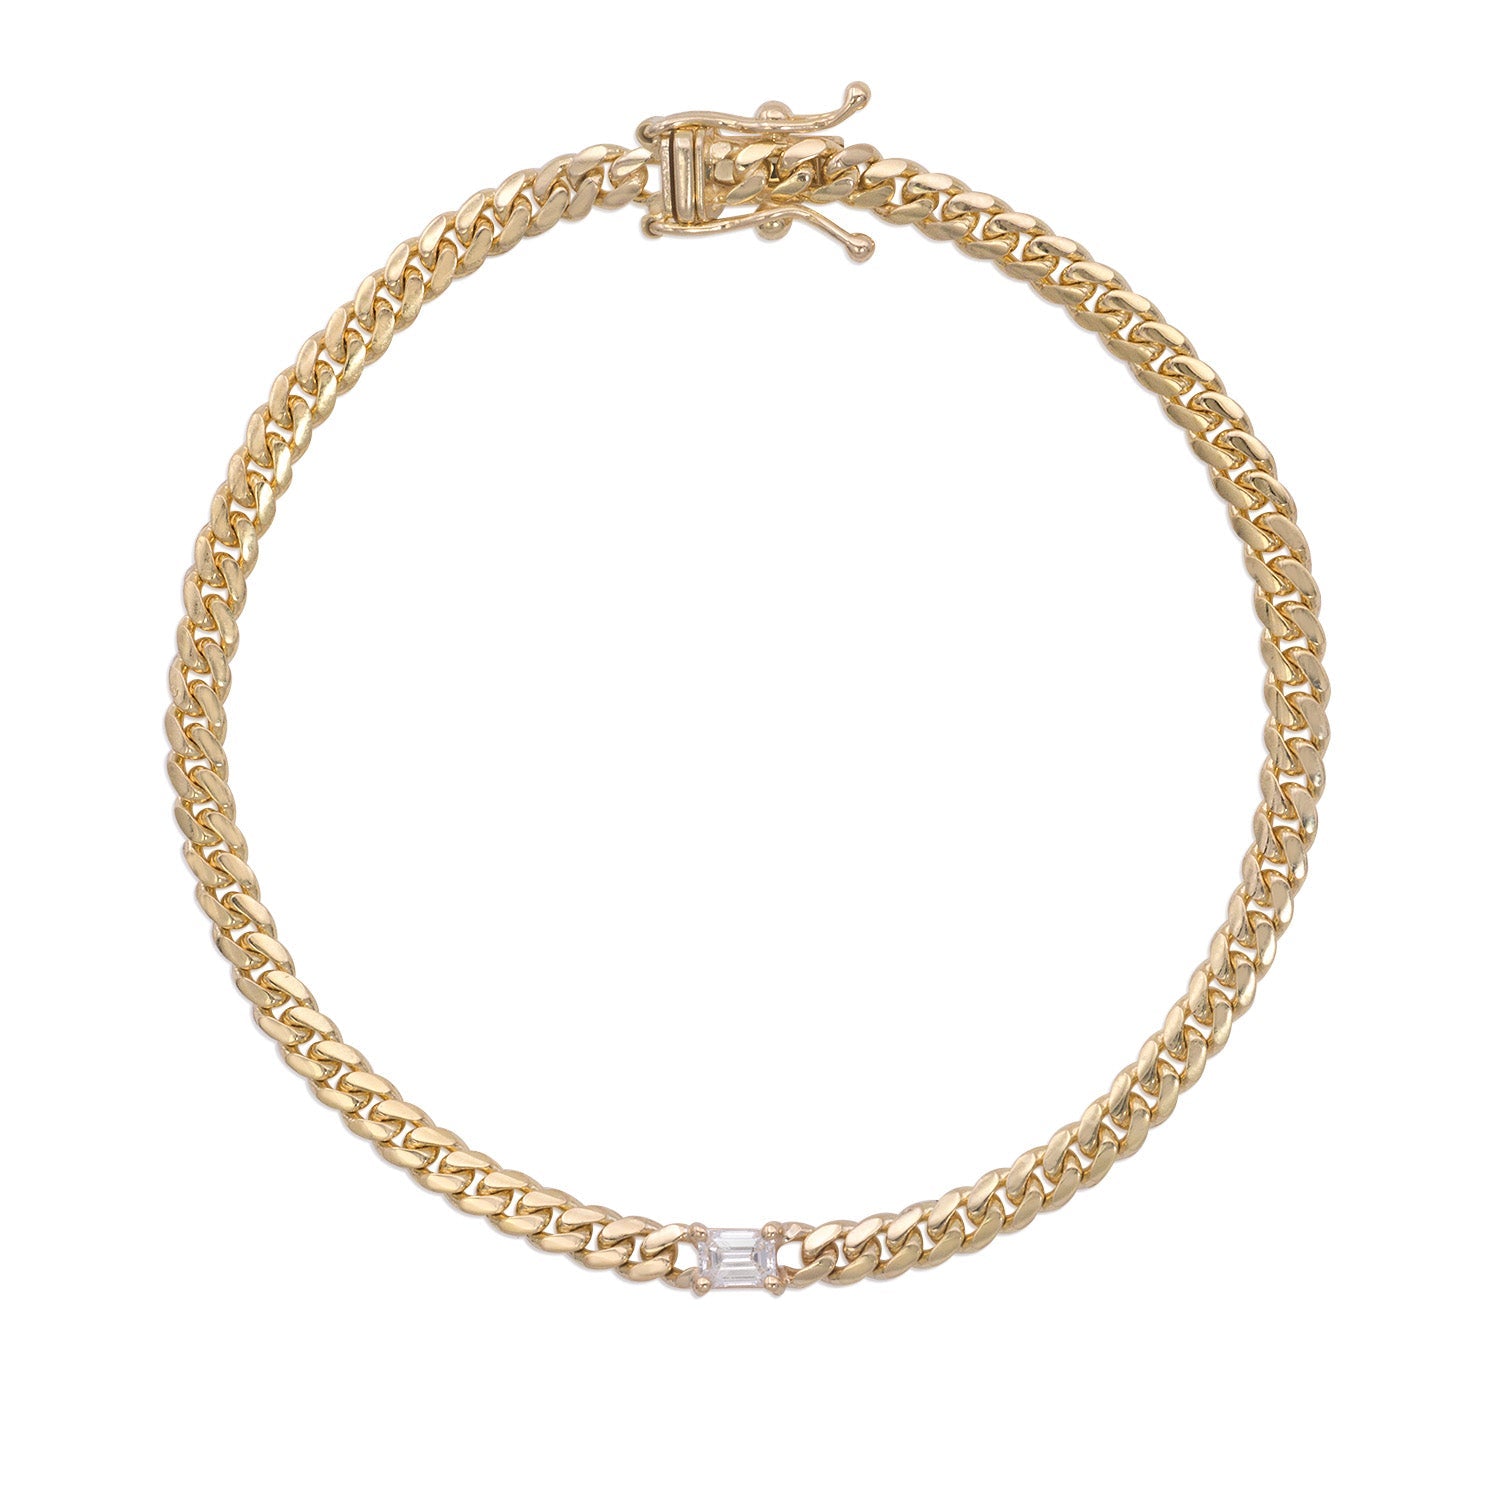  Solid Gold Curb Chain Bracelet 14K Yellow Gold 3mm Wide by 7  Long